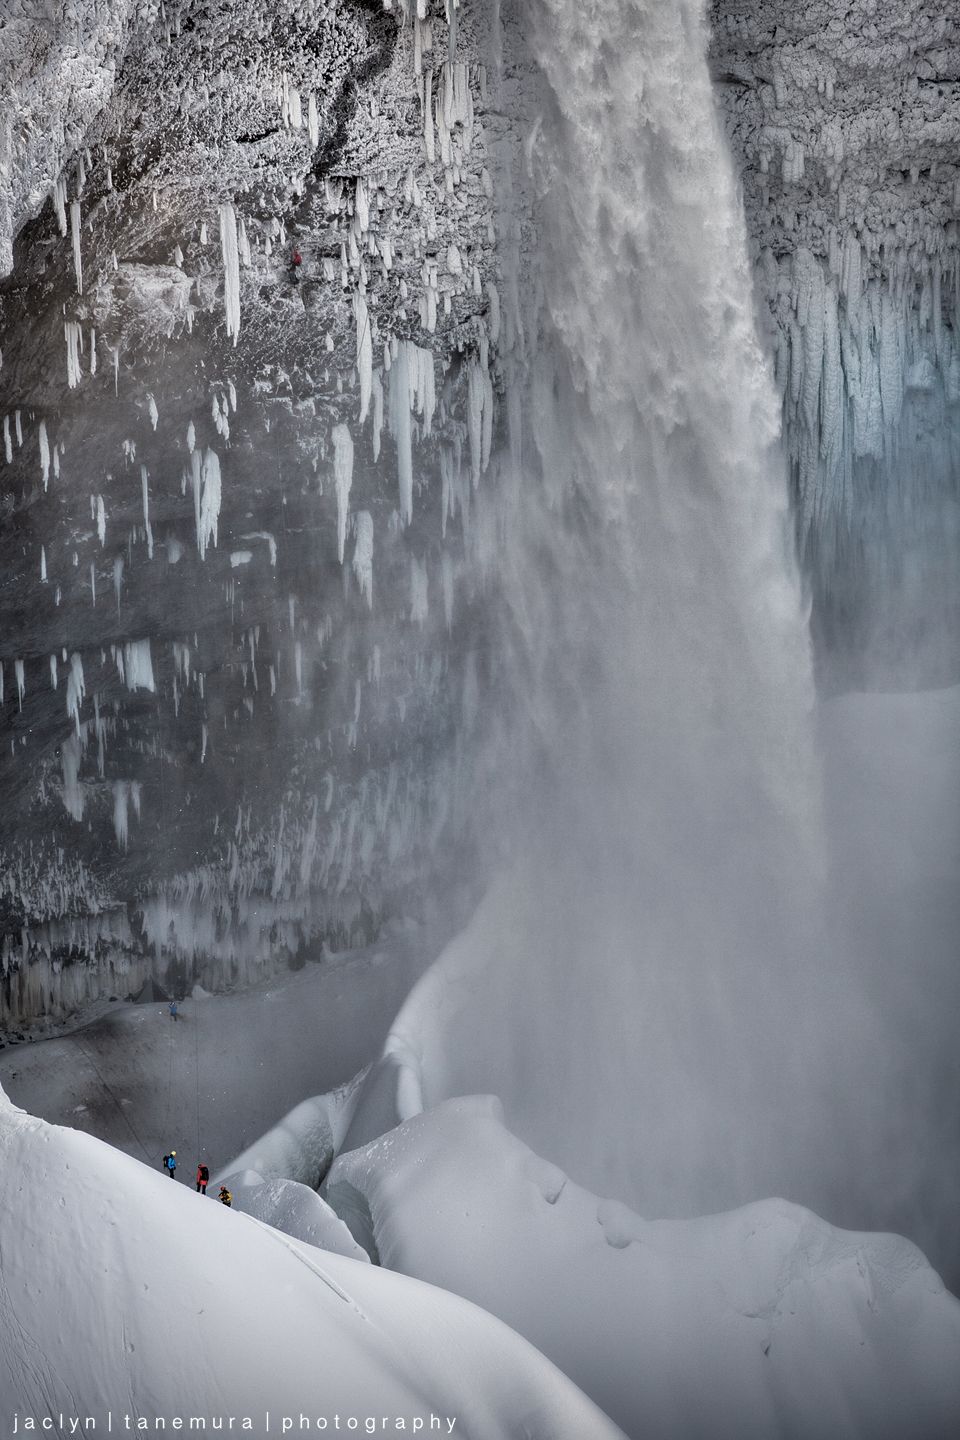 The Giant Helmcken Falls Must Be The Biggest Ice Machine In The World